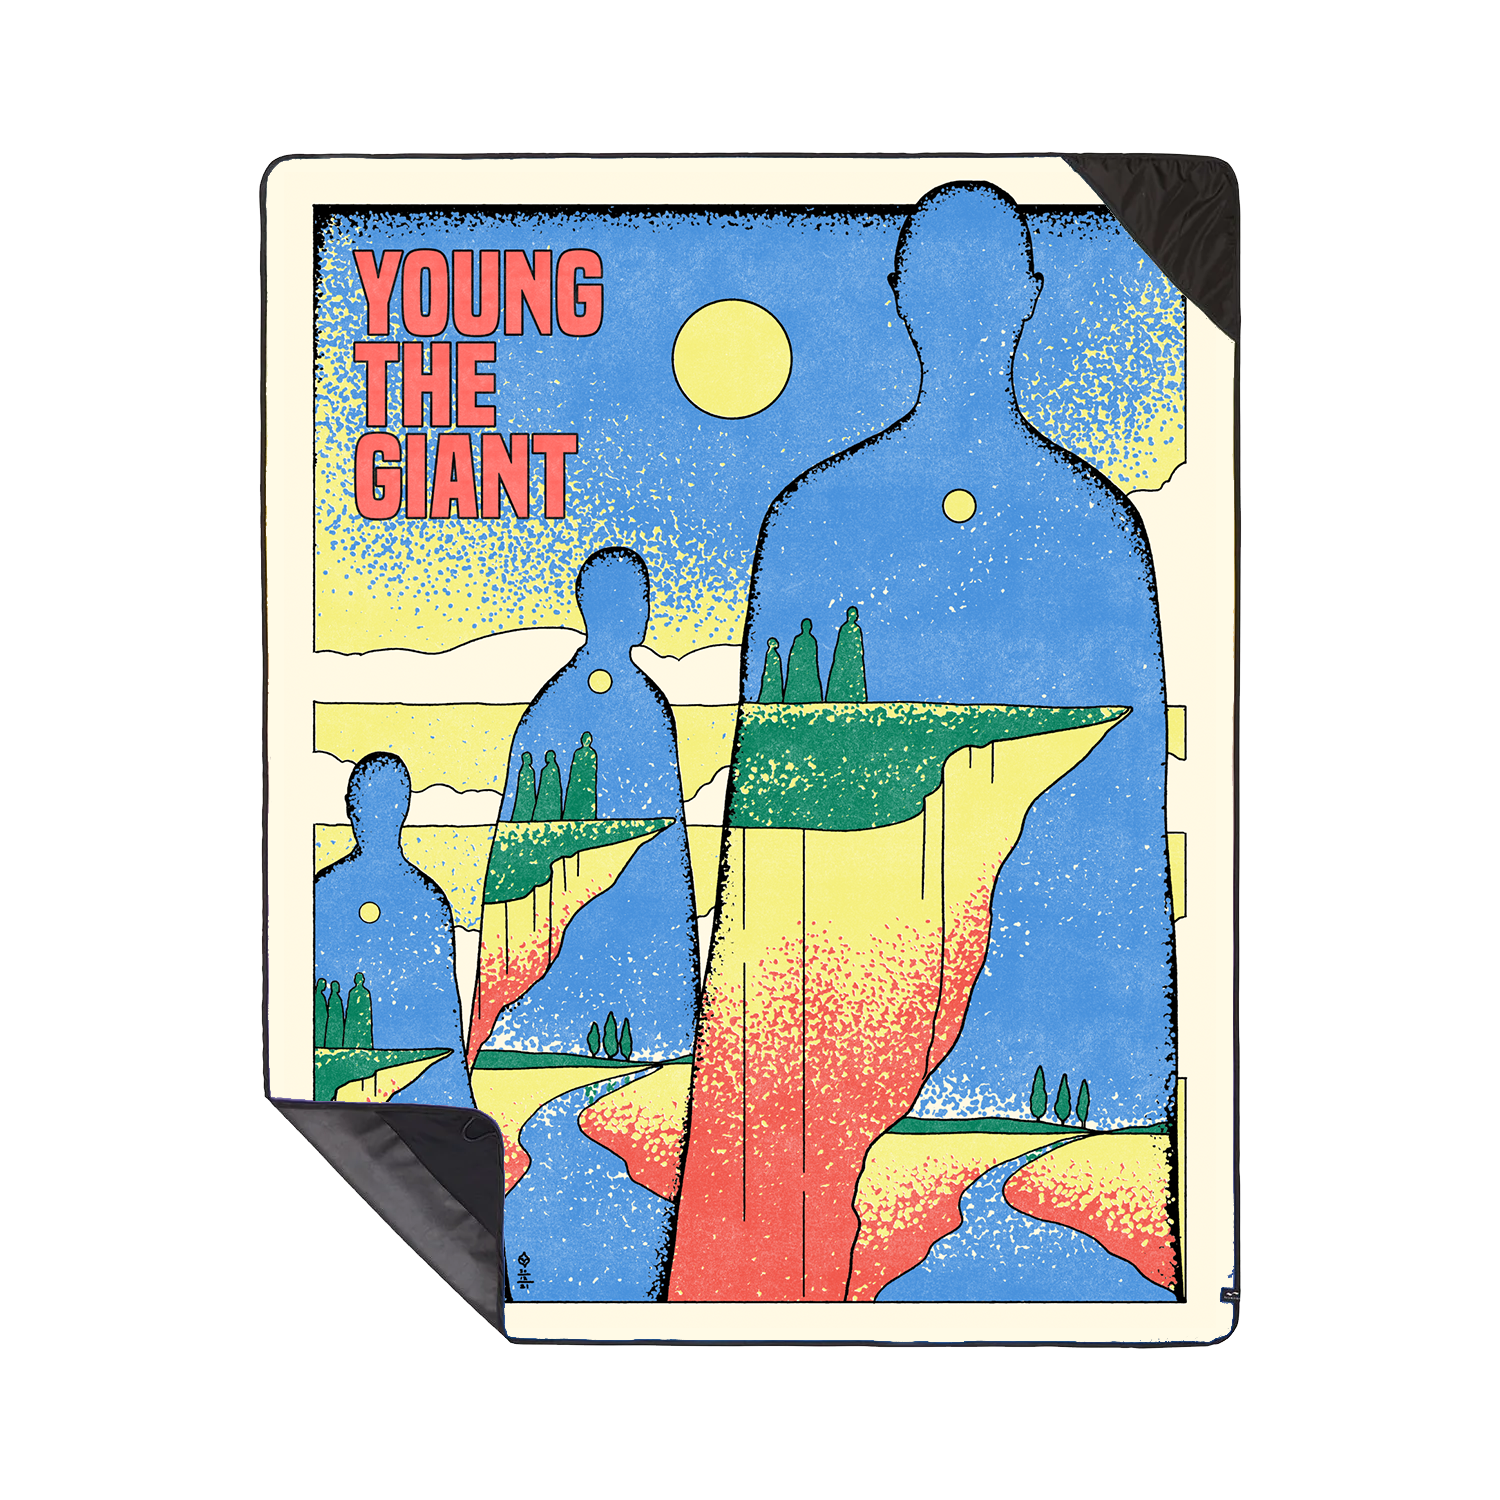 young the giant album cover 2022